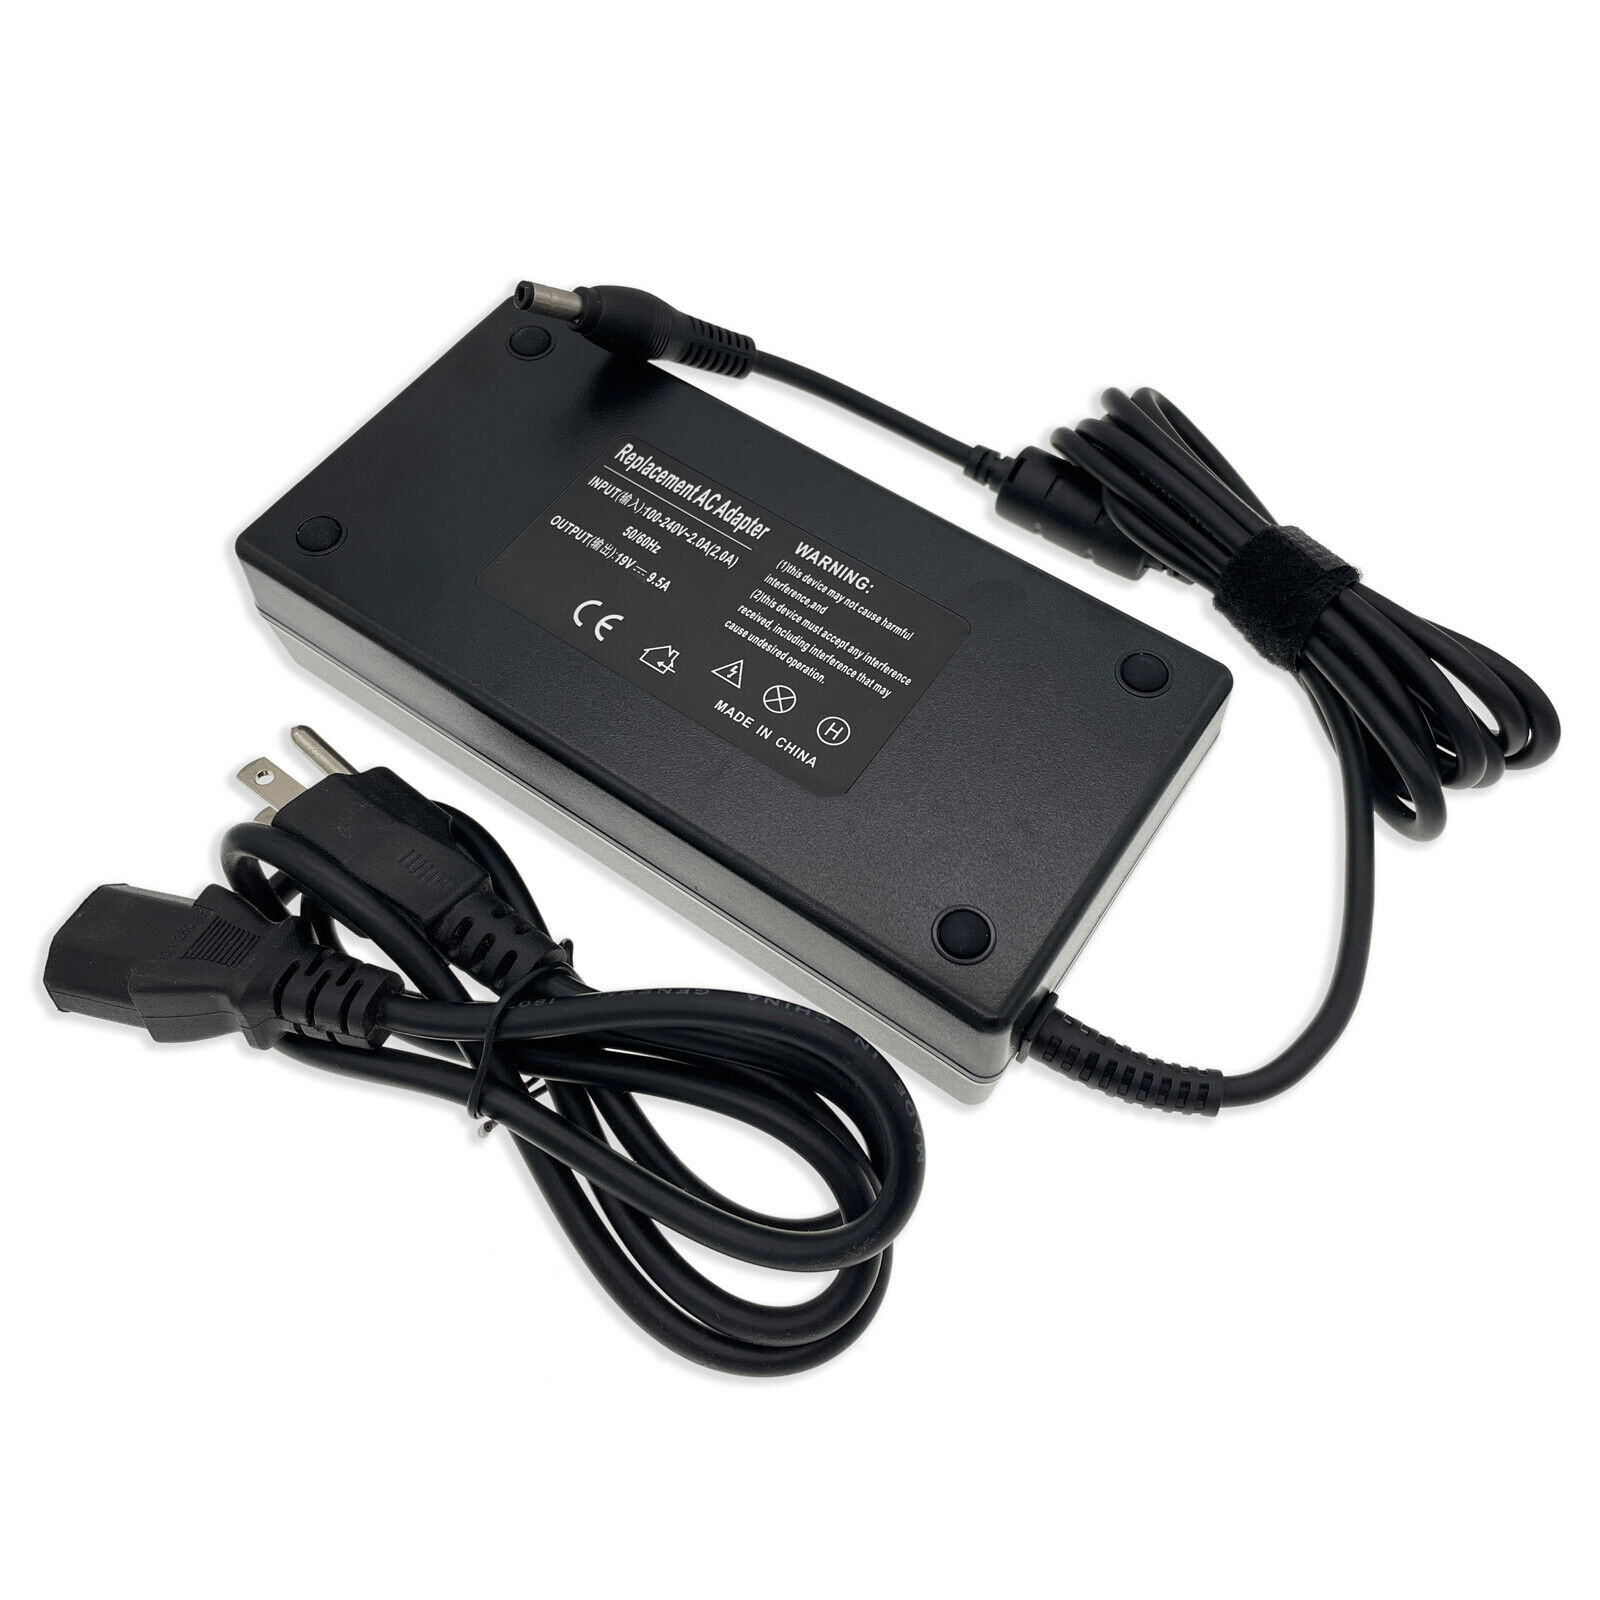 AC Adapter Power Cord Charger For Alienware Aurora m9700i M9700i-R1 Laptop 180W